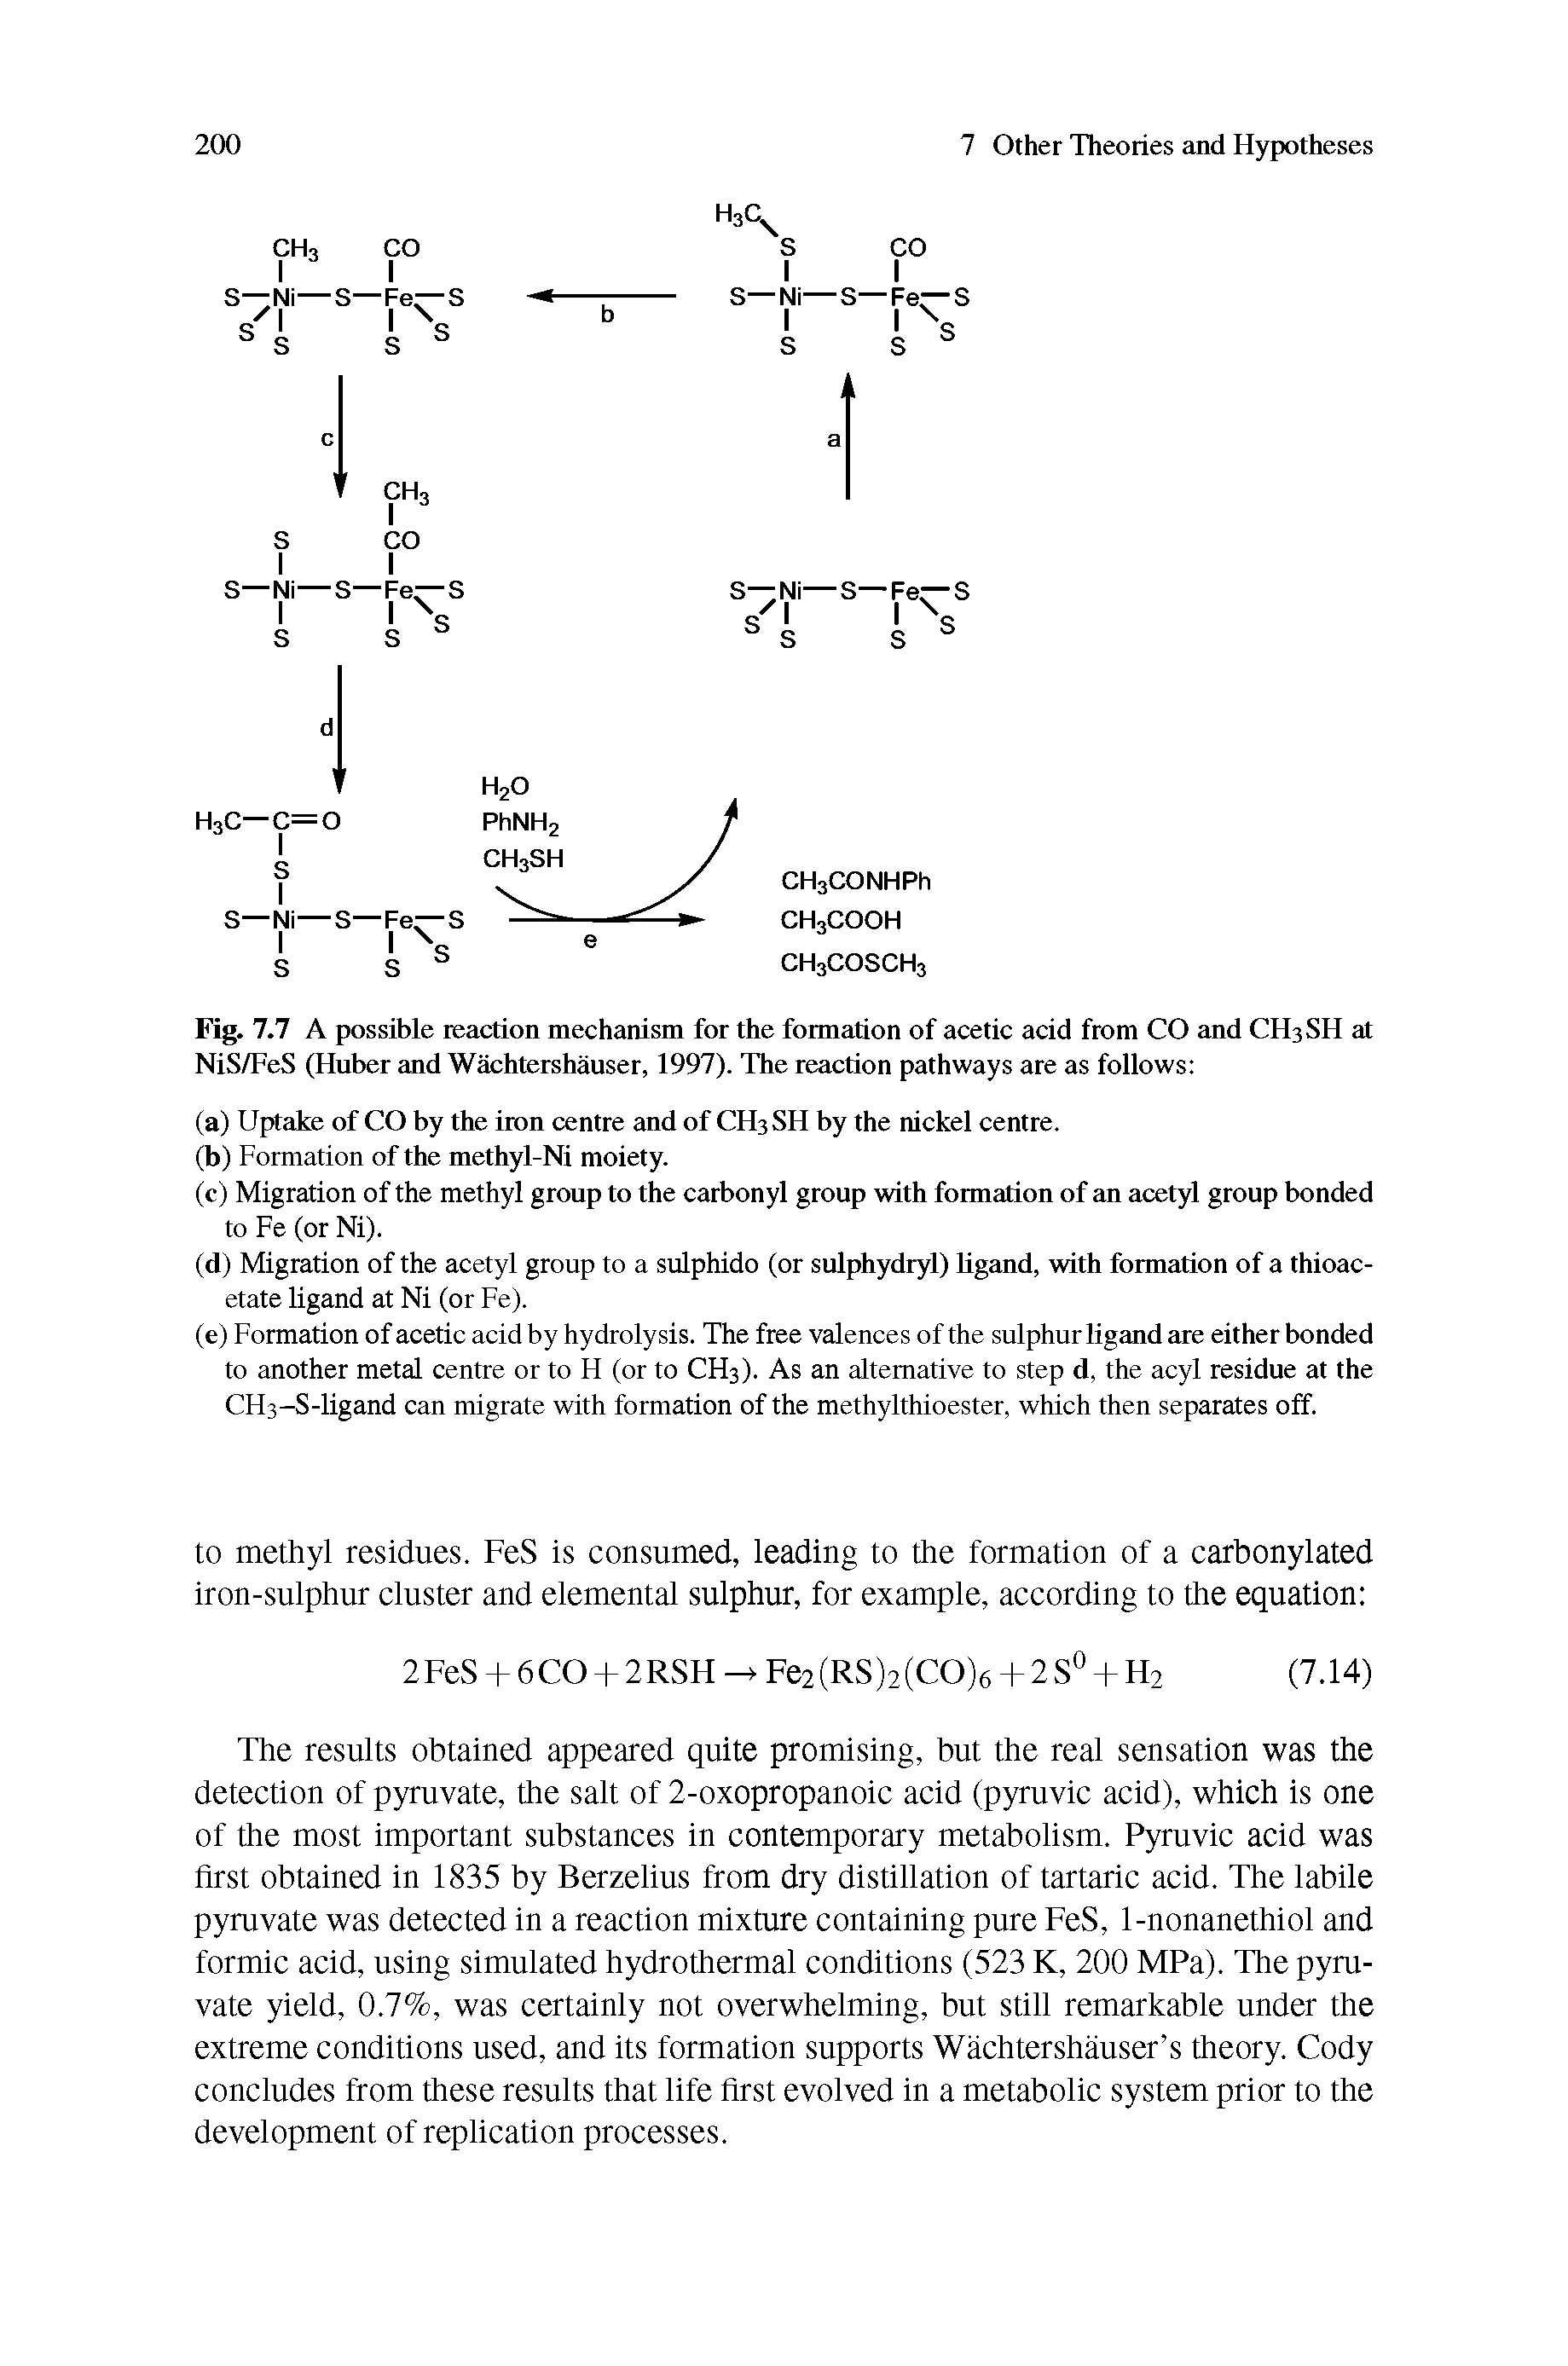 Fig. 7.7 A possible reaction mechanism for the formation of acetic acid from CO and CH3SH at...